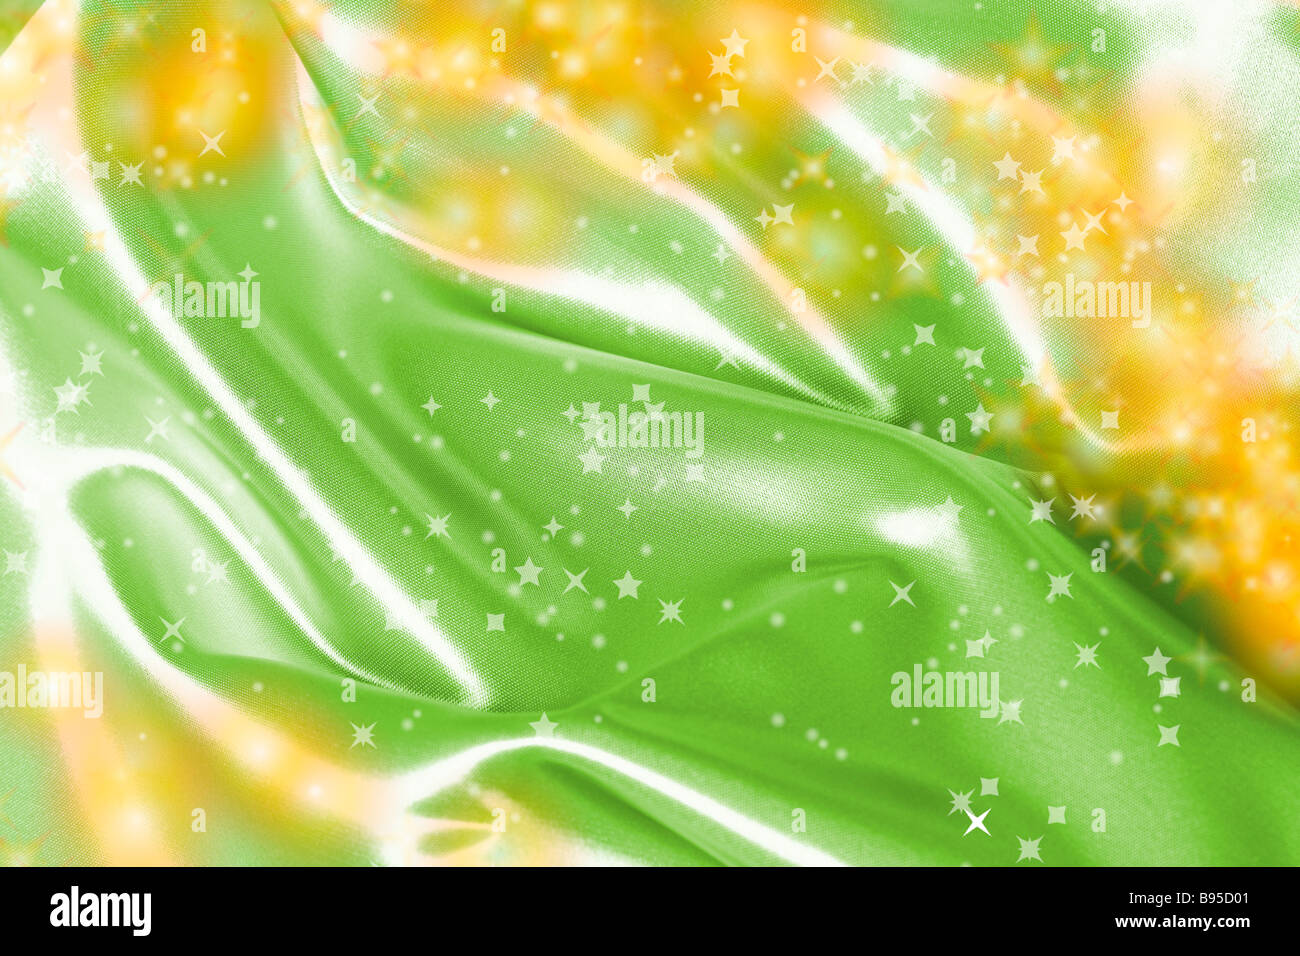 Close-up of a green blanket Stock Photo